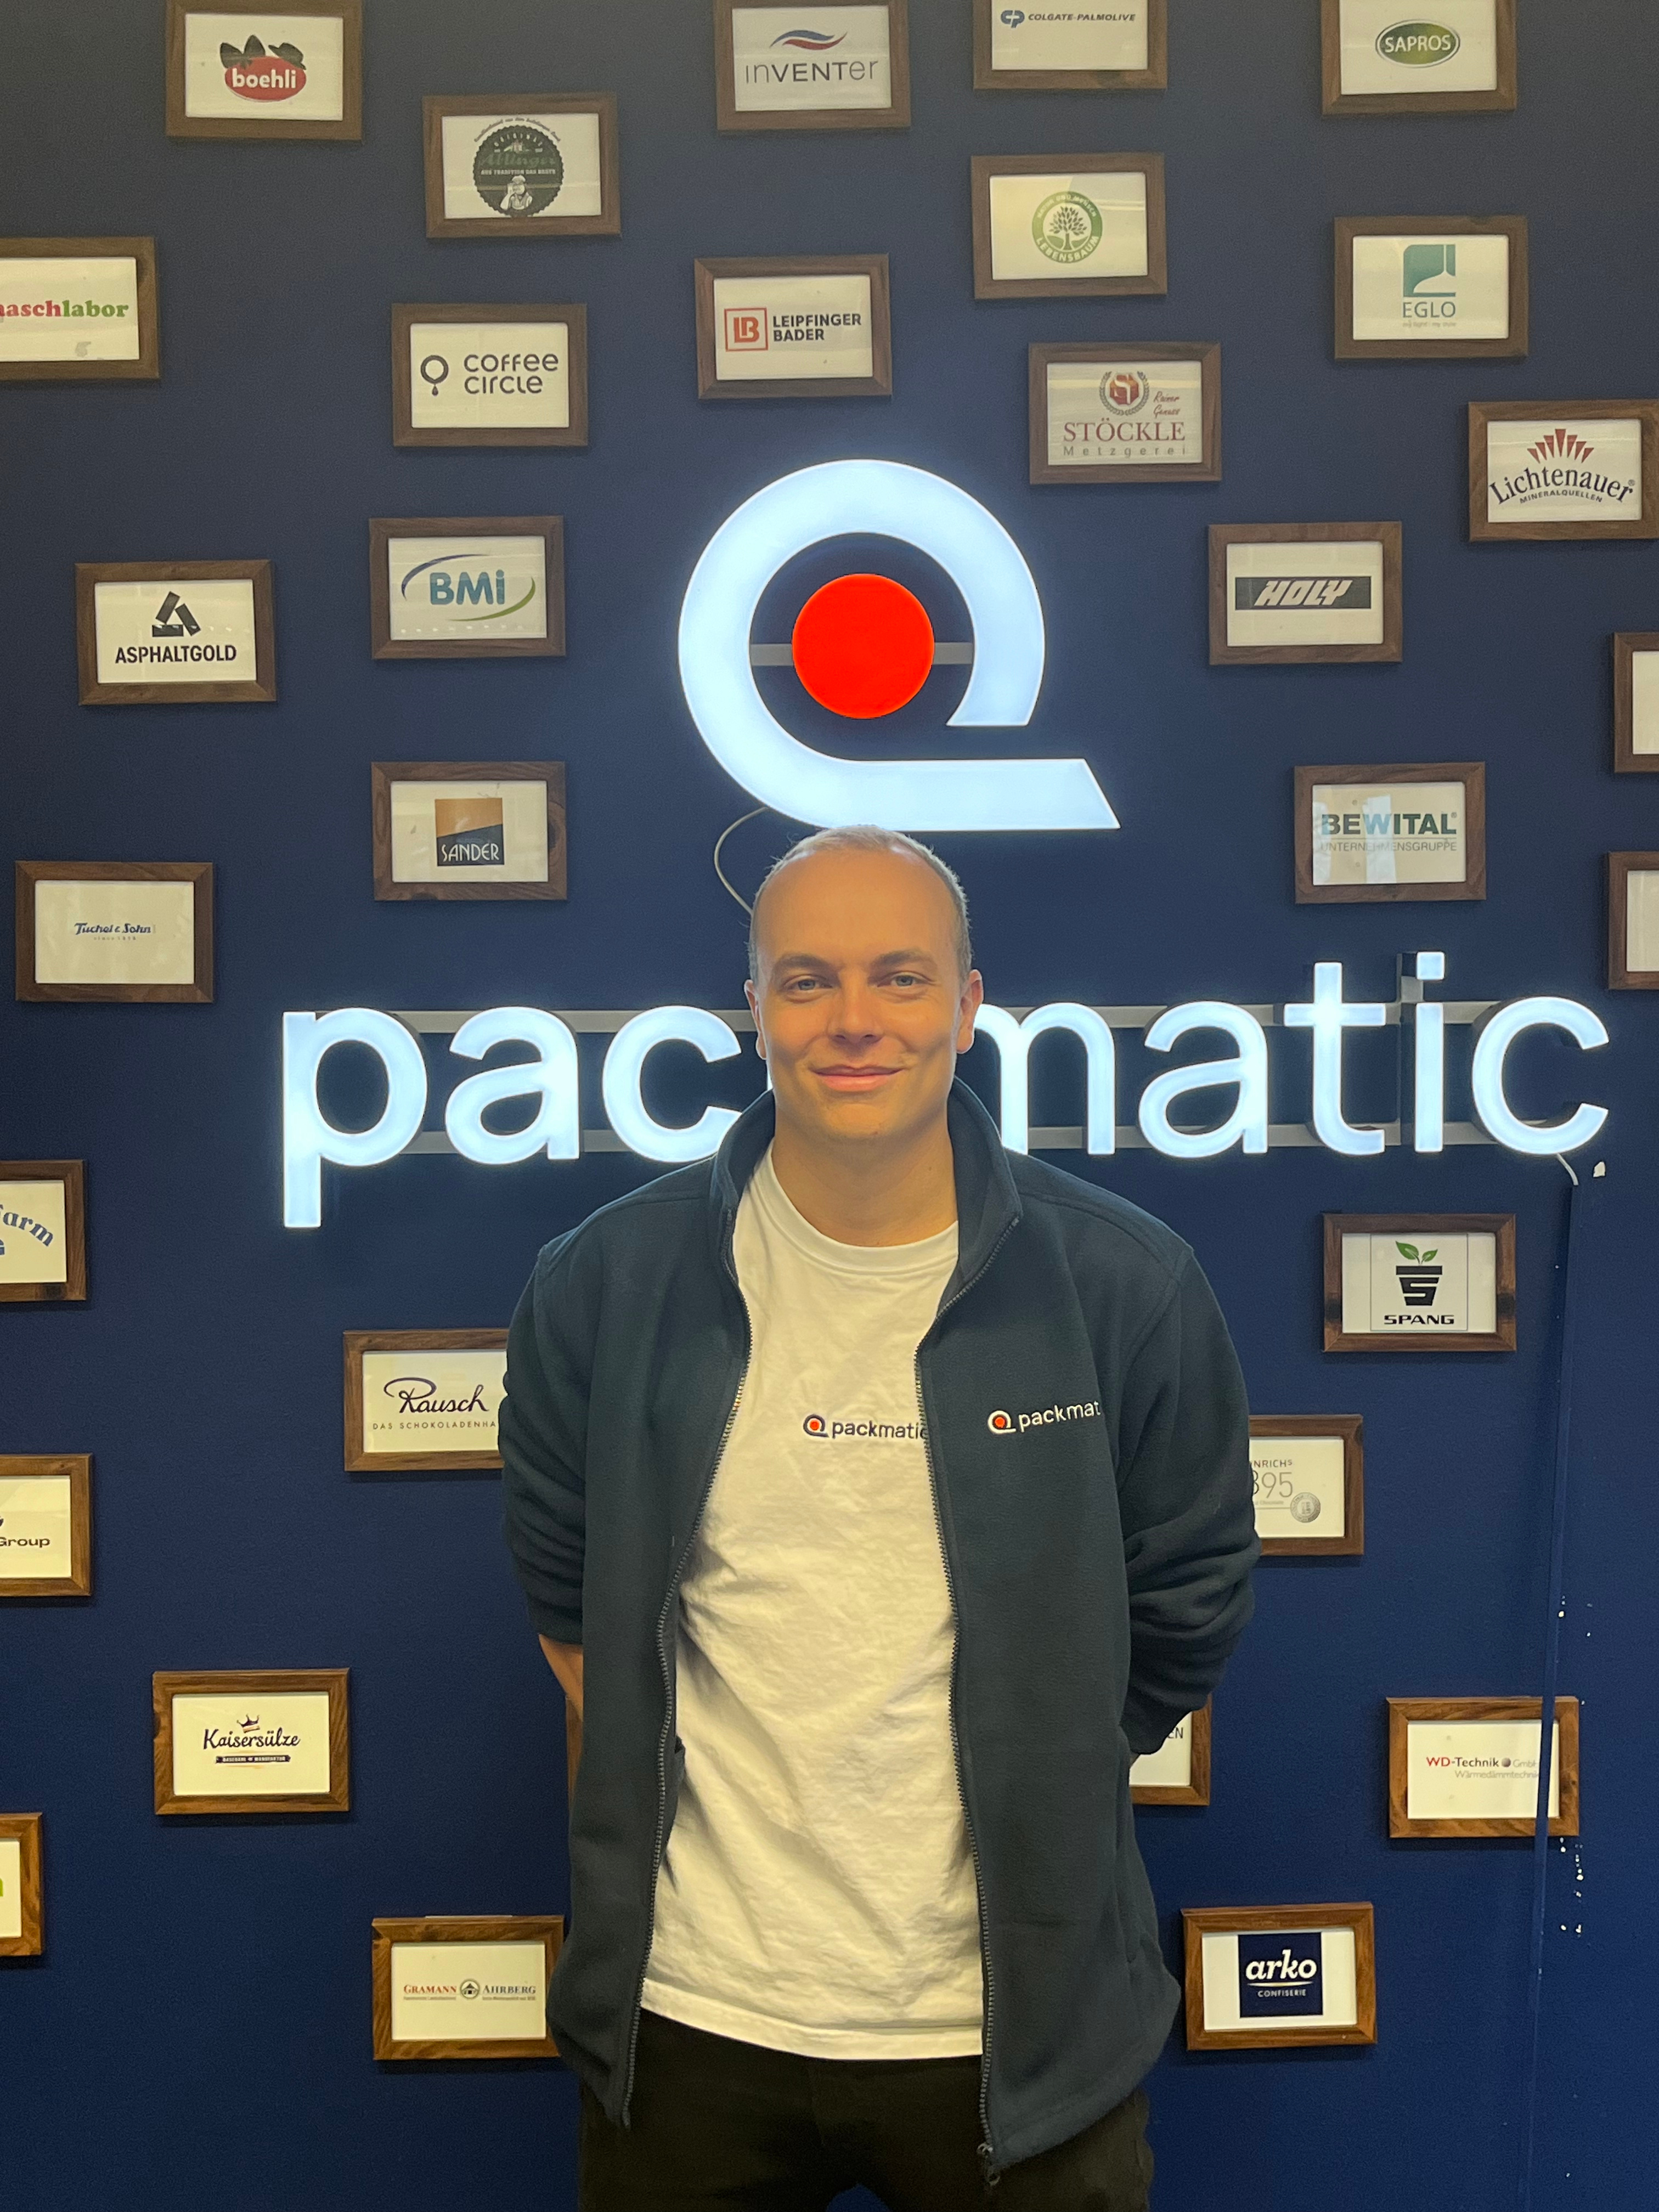 Paul Schraven in front of Packmatic banner